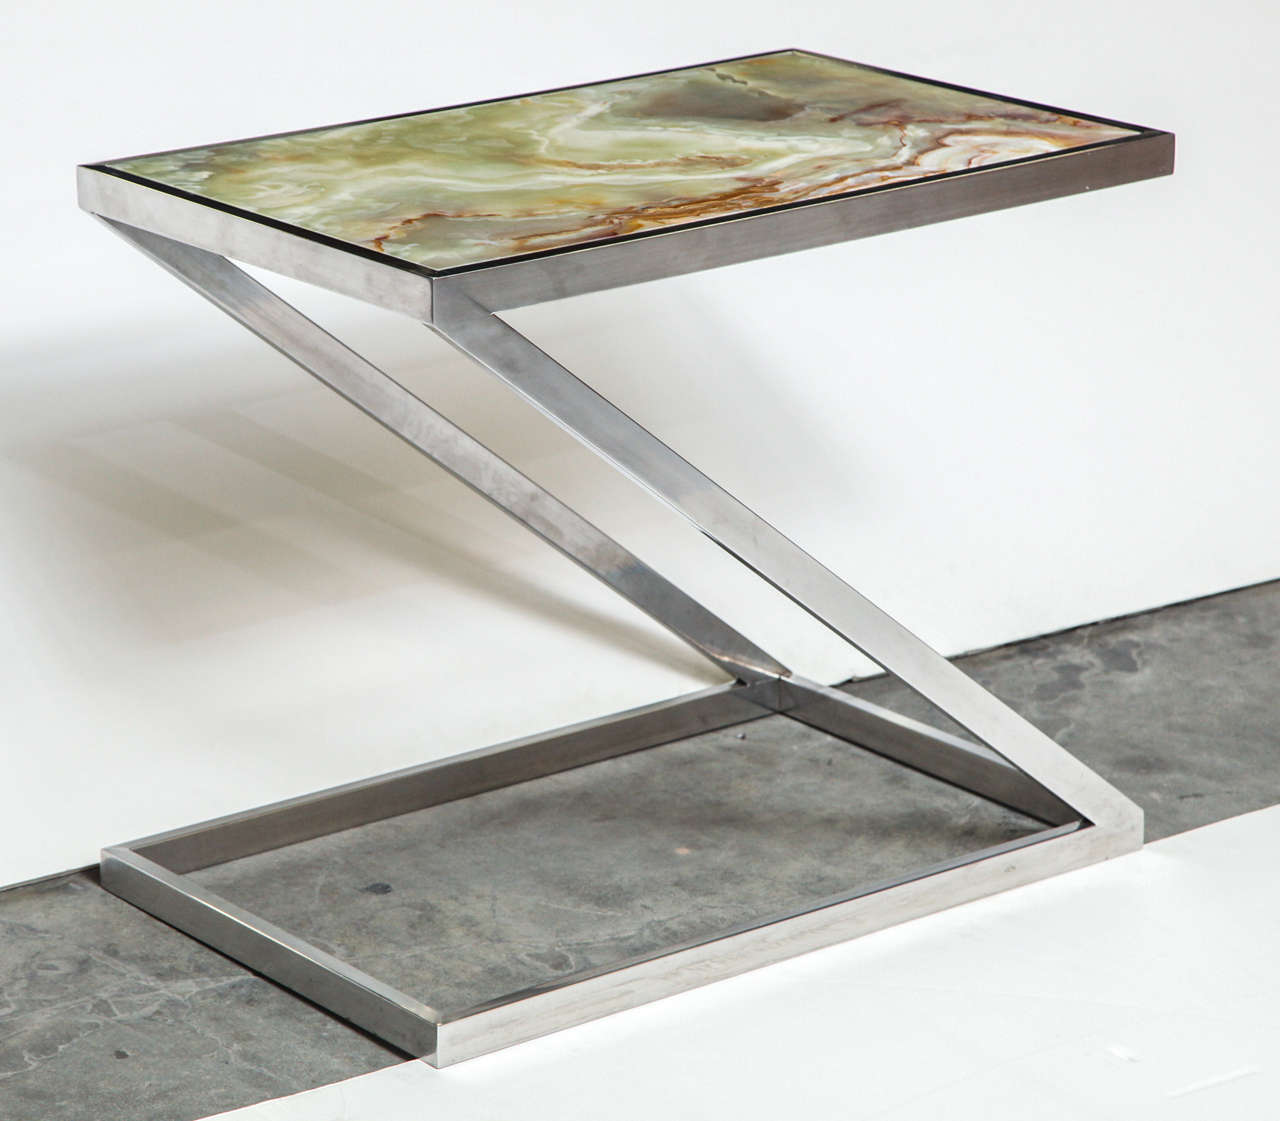 Phenomenal Italian side table with an onyx top and chrome base, circa 1970.